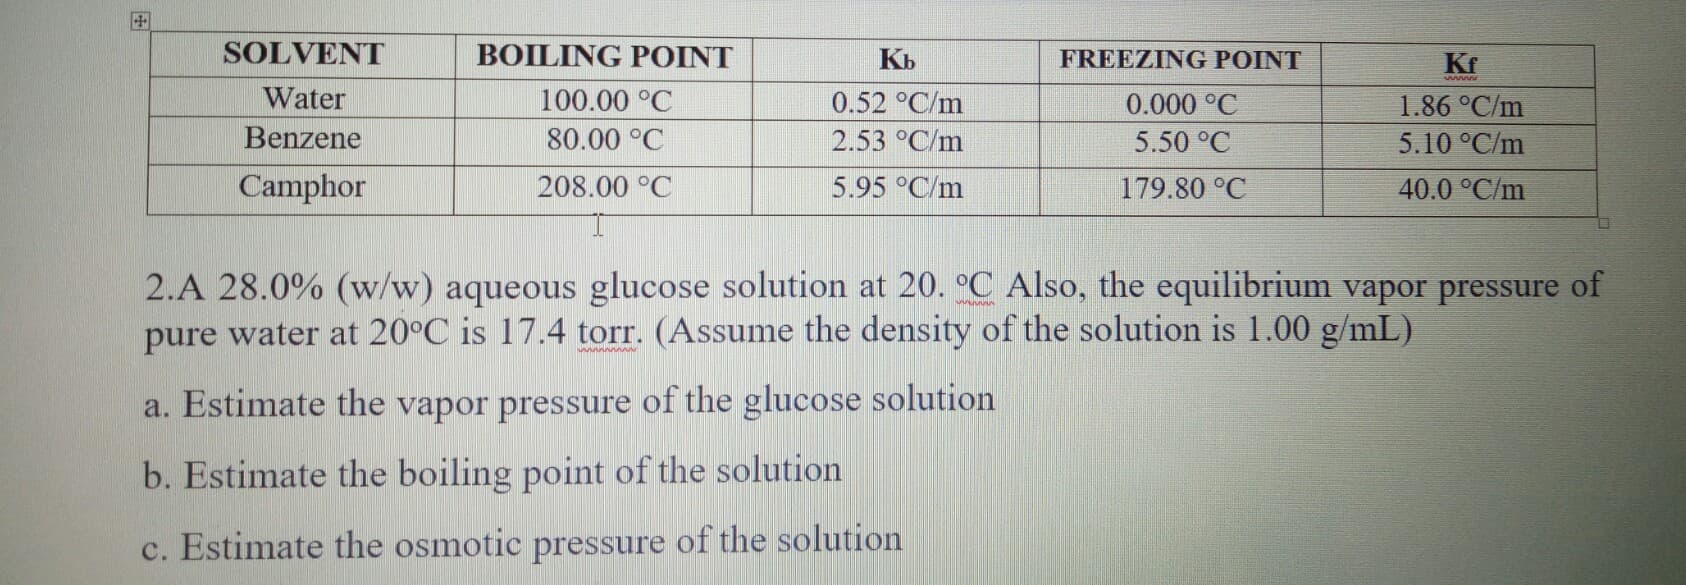 2.A 28.0% (w/w) aqueous glucose solution at 20. °C Also, the equilibrium vapor pressure of
pure water at 20°C is 17.4 torr. (Assume the density of the solution is 1.00 g/mL)
a. Estimate the vapor pressure of the glucose solution
b. Estimate the boiling point of the solution
c. Estimate the osmotic pressure of the solution
